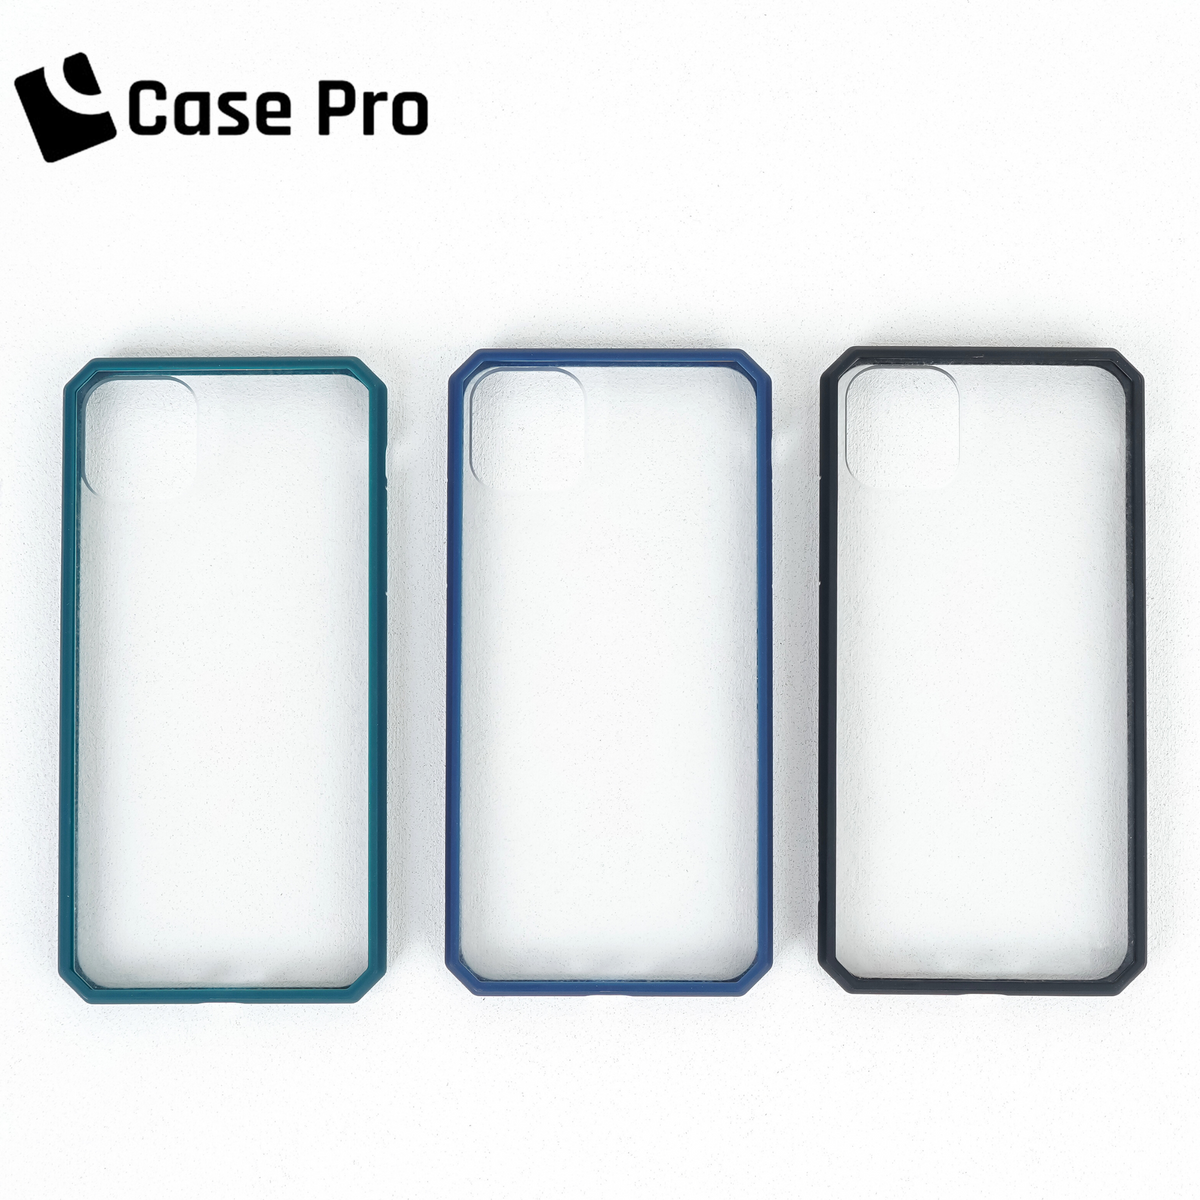 CASE PRO iPhone 11 Pro Max Case (Impact Protection)